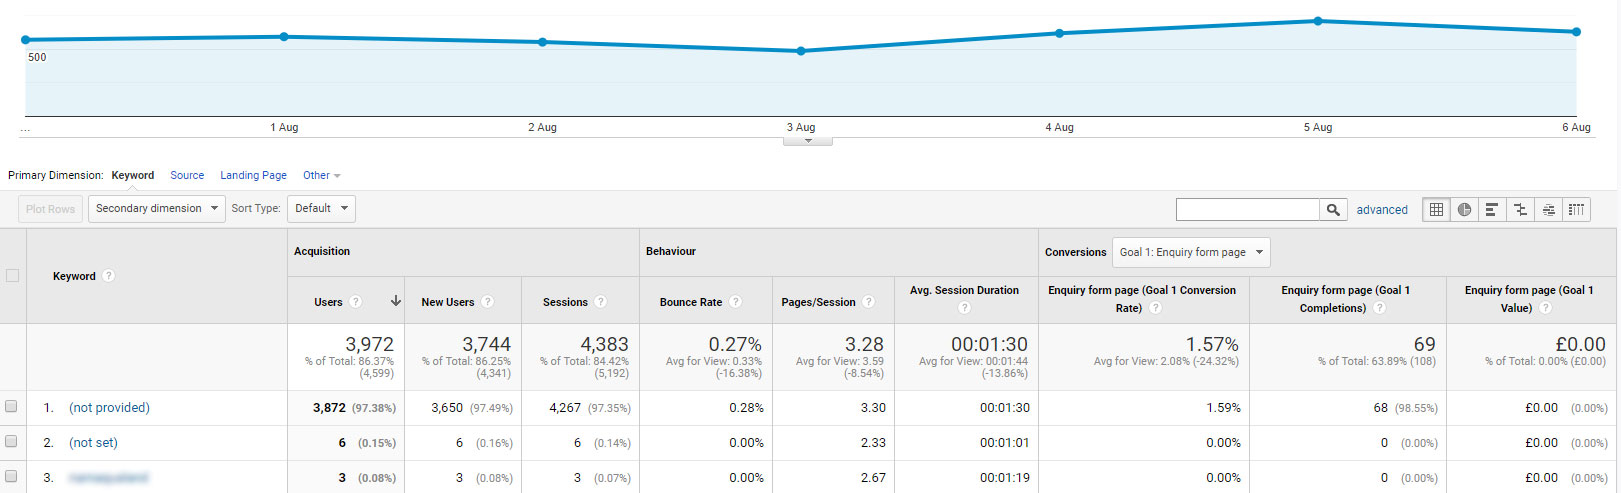 organic traffic by conversion rate data view on Google Analytics